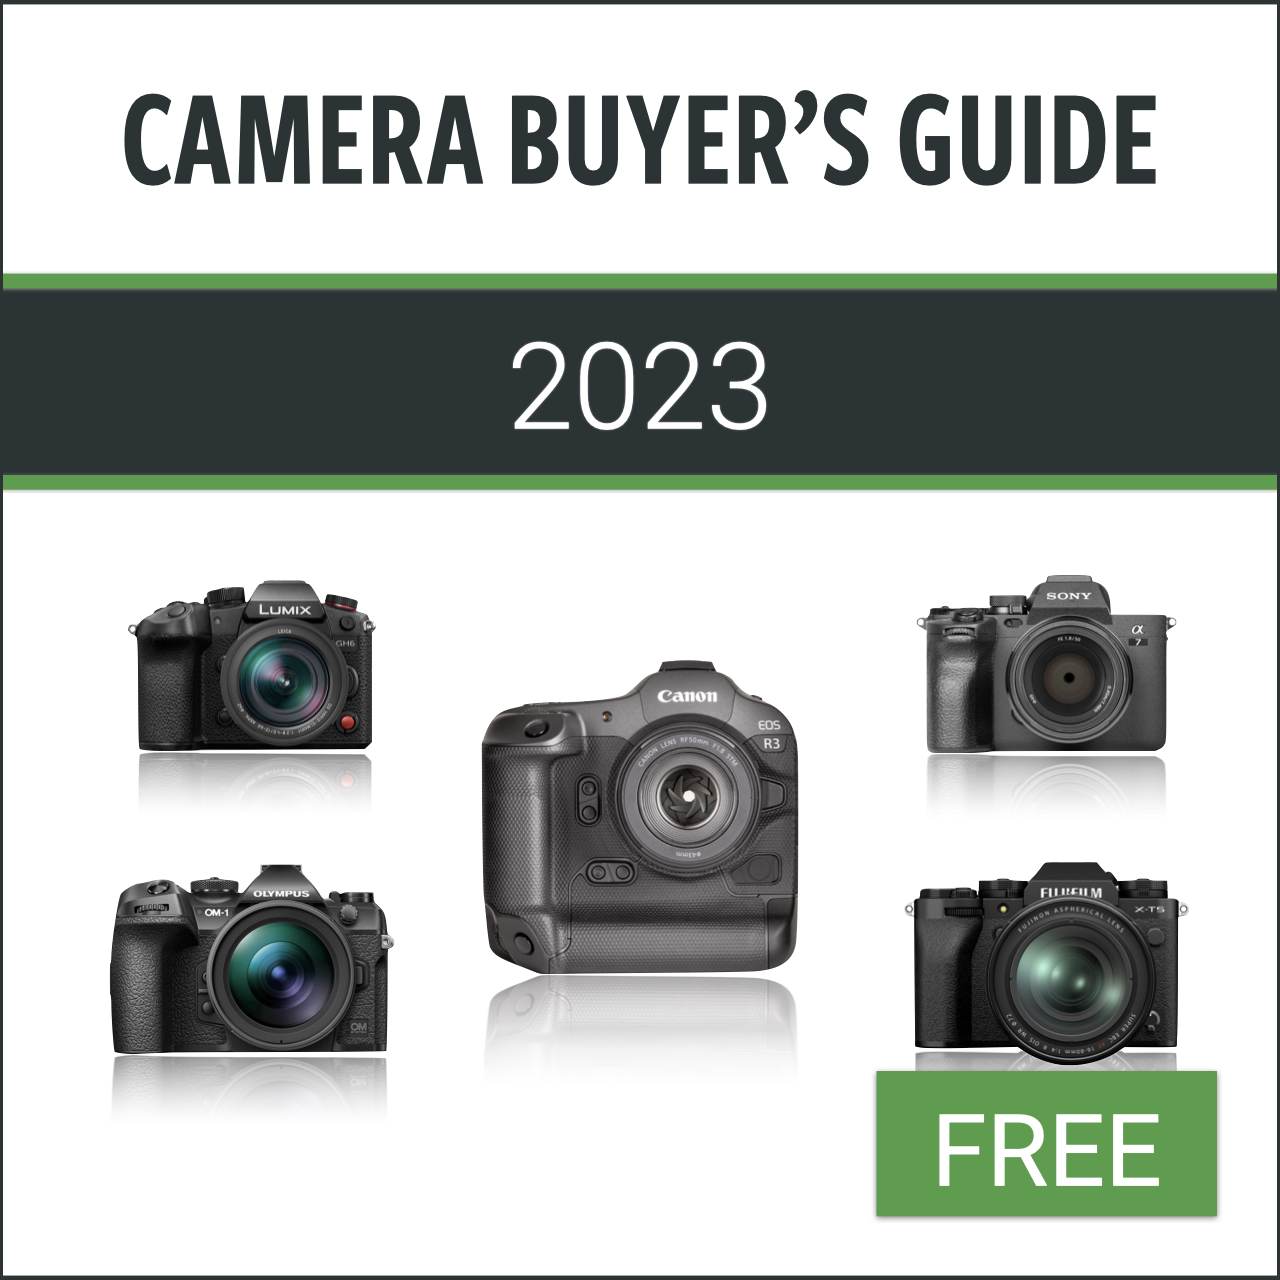 Camera Buyer’s Guide: 2023